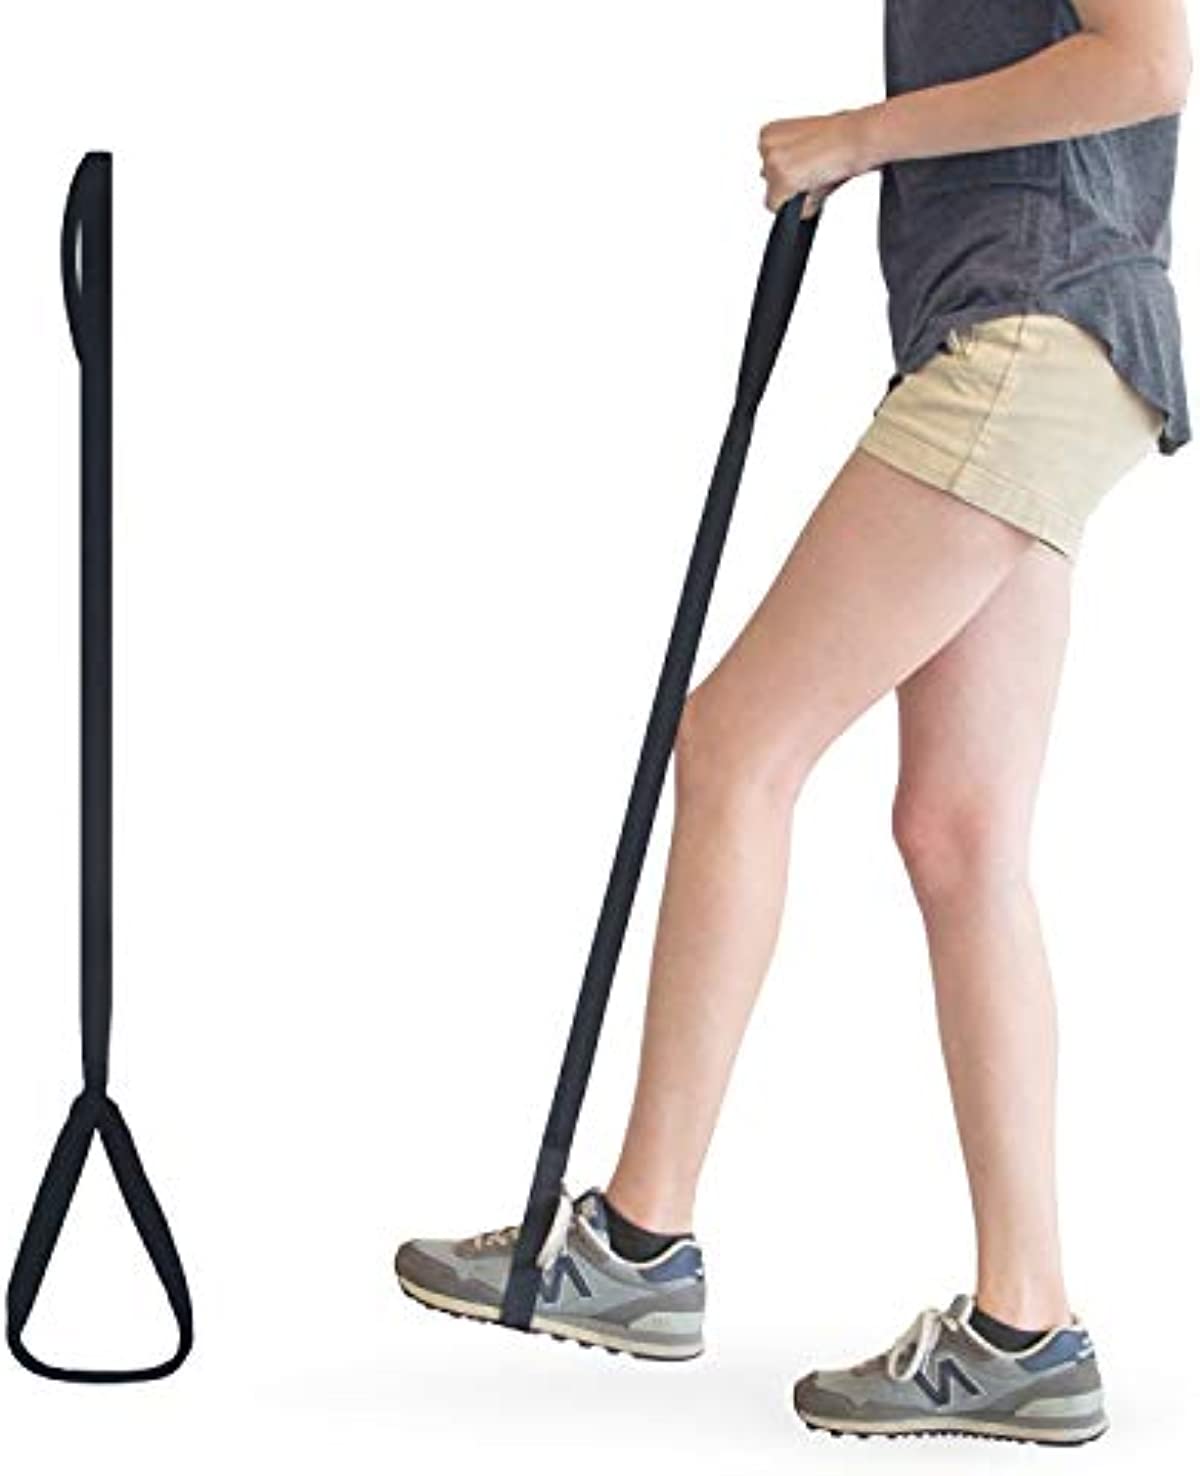 RMS 35 Inch Long Leg Lifter - Durable & Rigid Hand Strap & Foot Loop - Ideal Mobility Tool for Wheelchair, Hip & Knee Replacement Surgery (35 Inch Long)